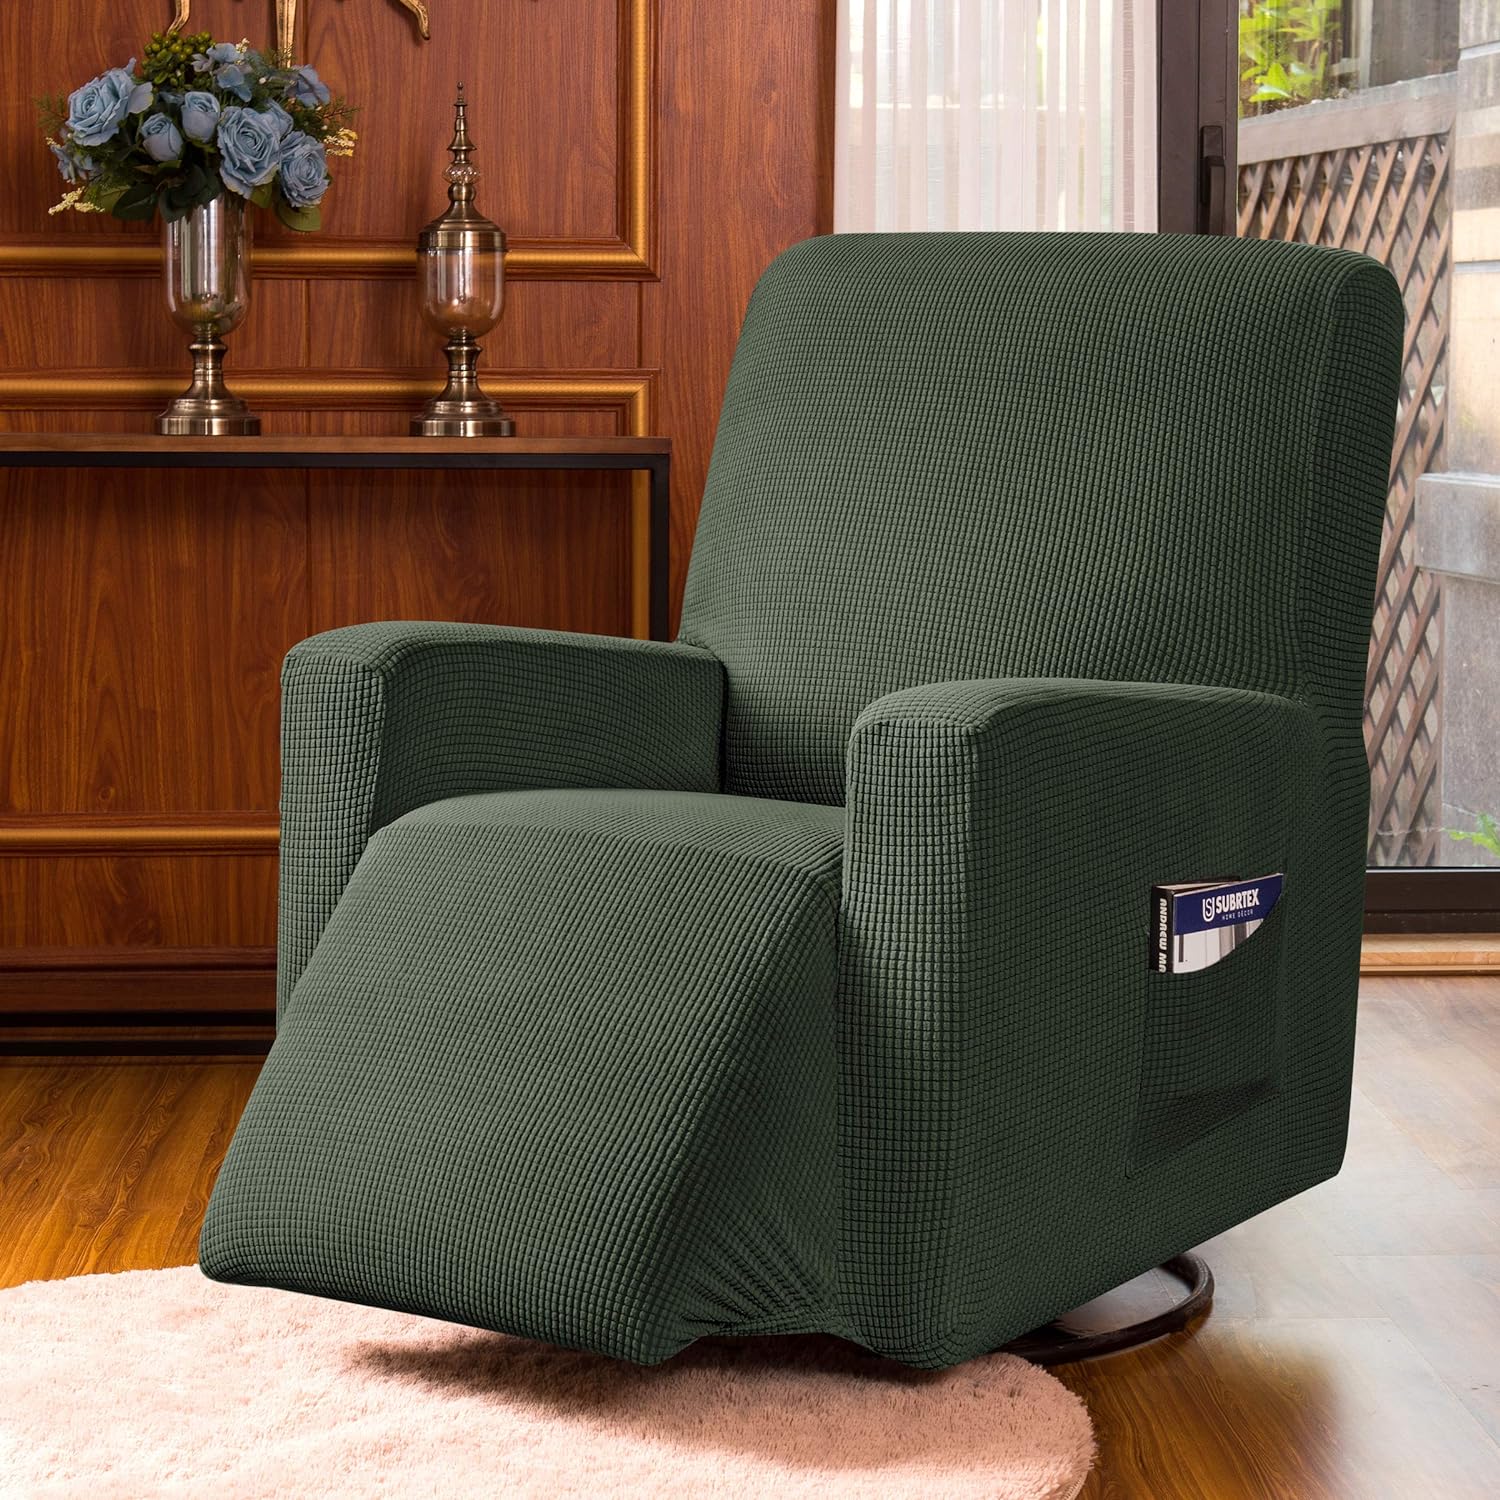 Subrtex Recliner Slipcover Stretch, Leather Chair Slipcovers